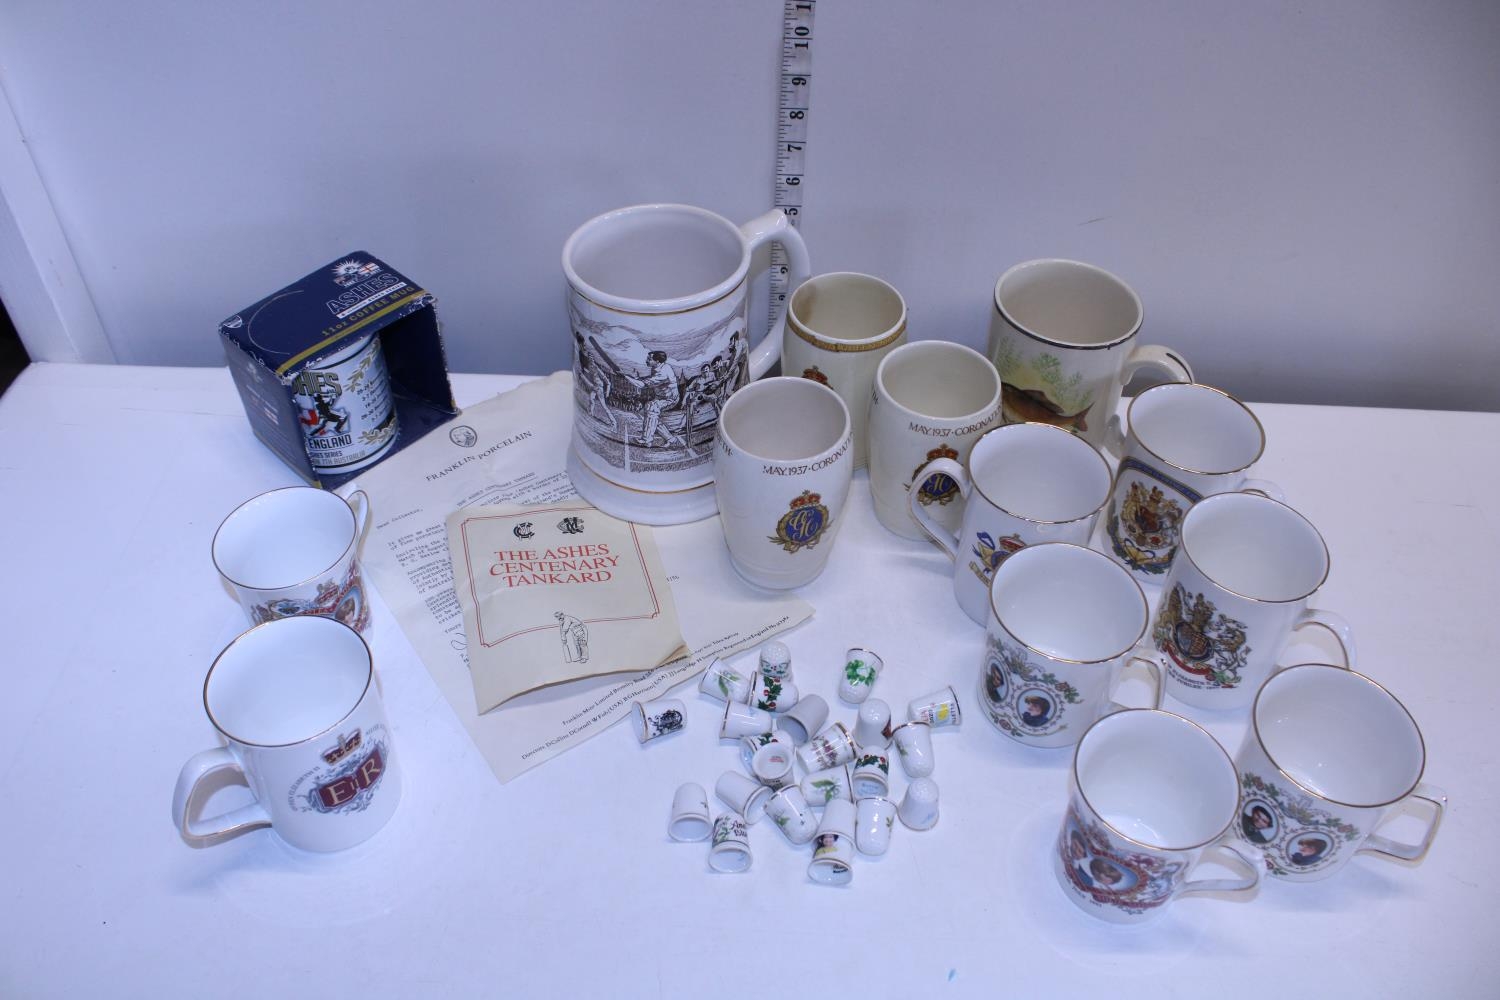 A job lot of assorted commemorative ware mugs and other